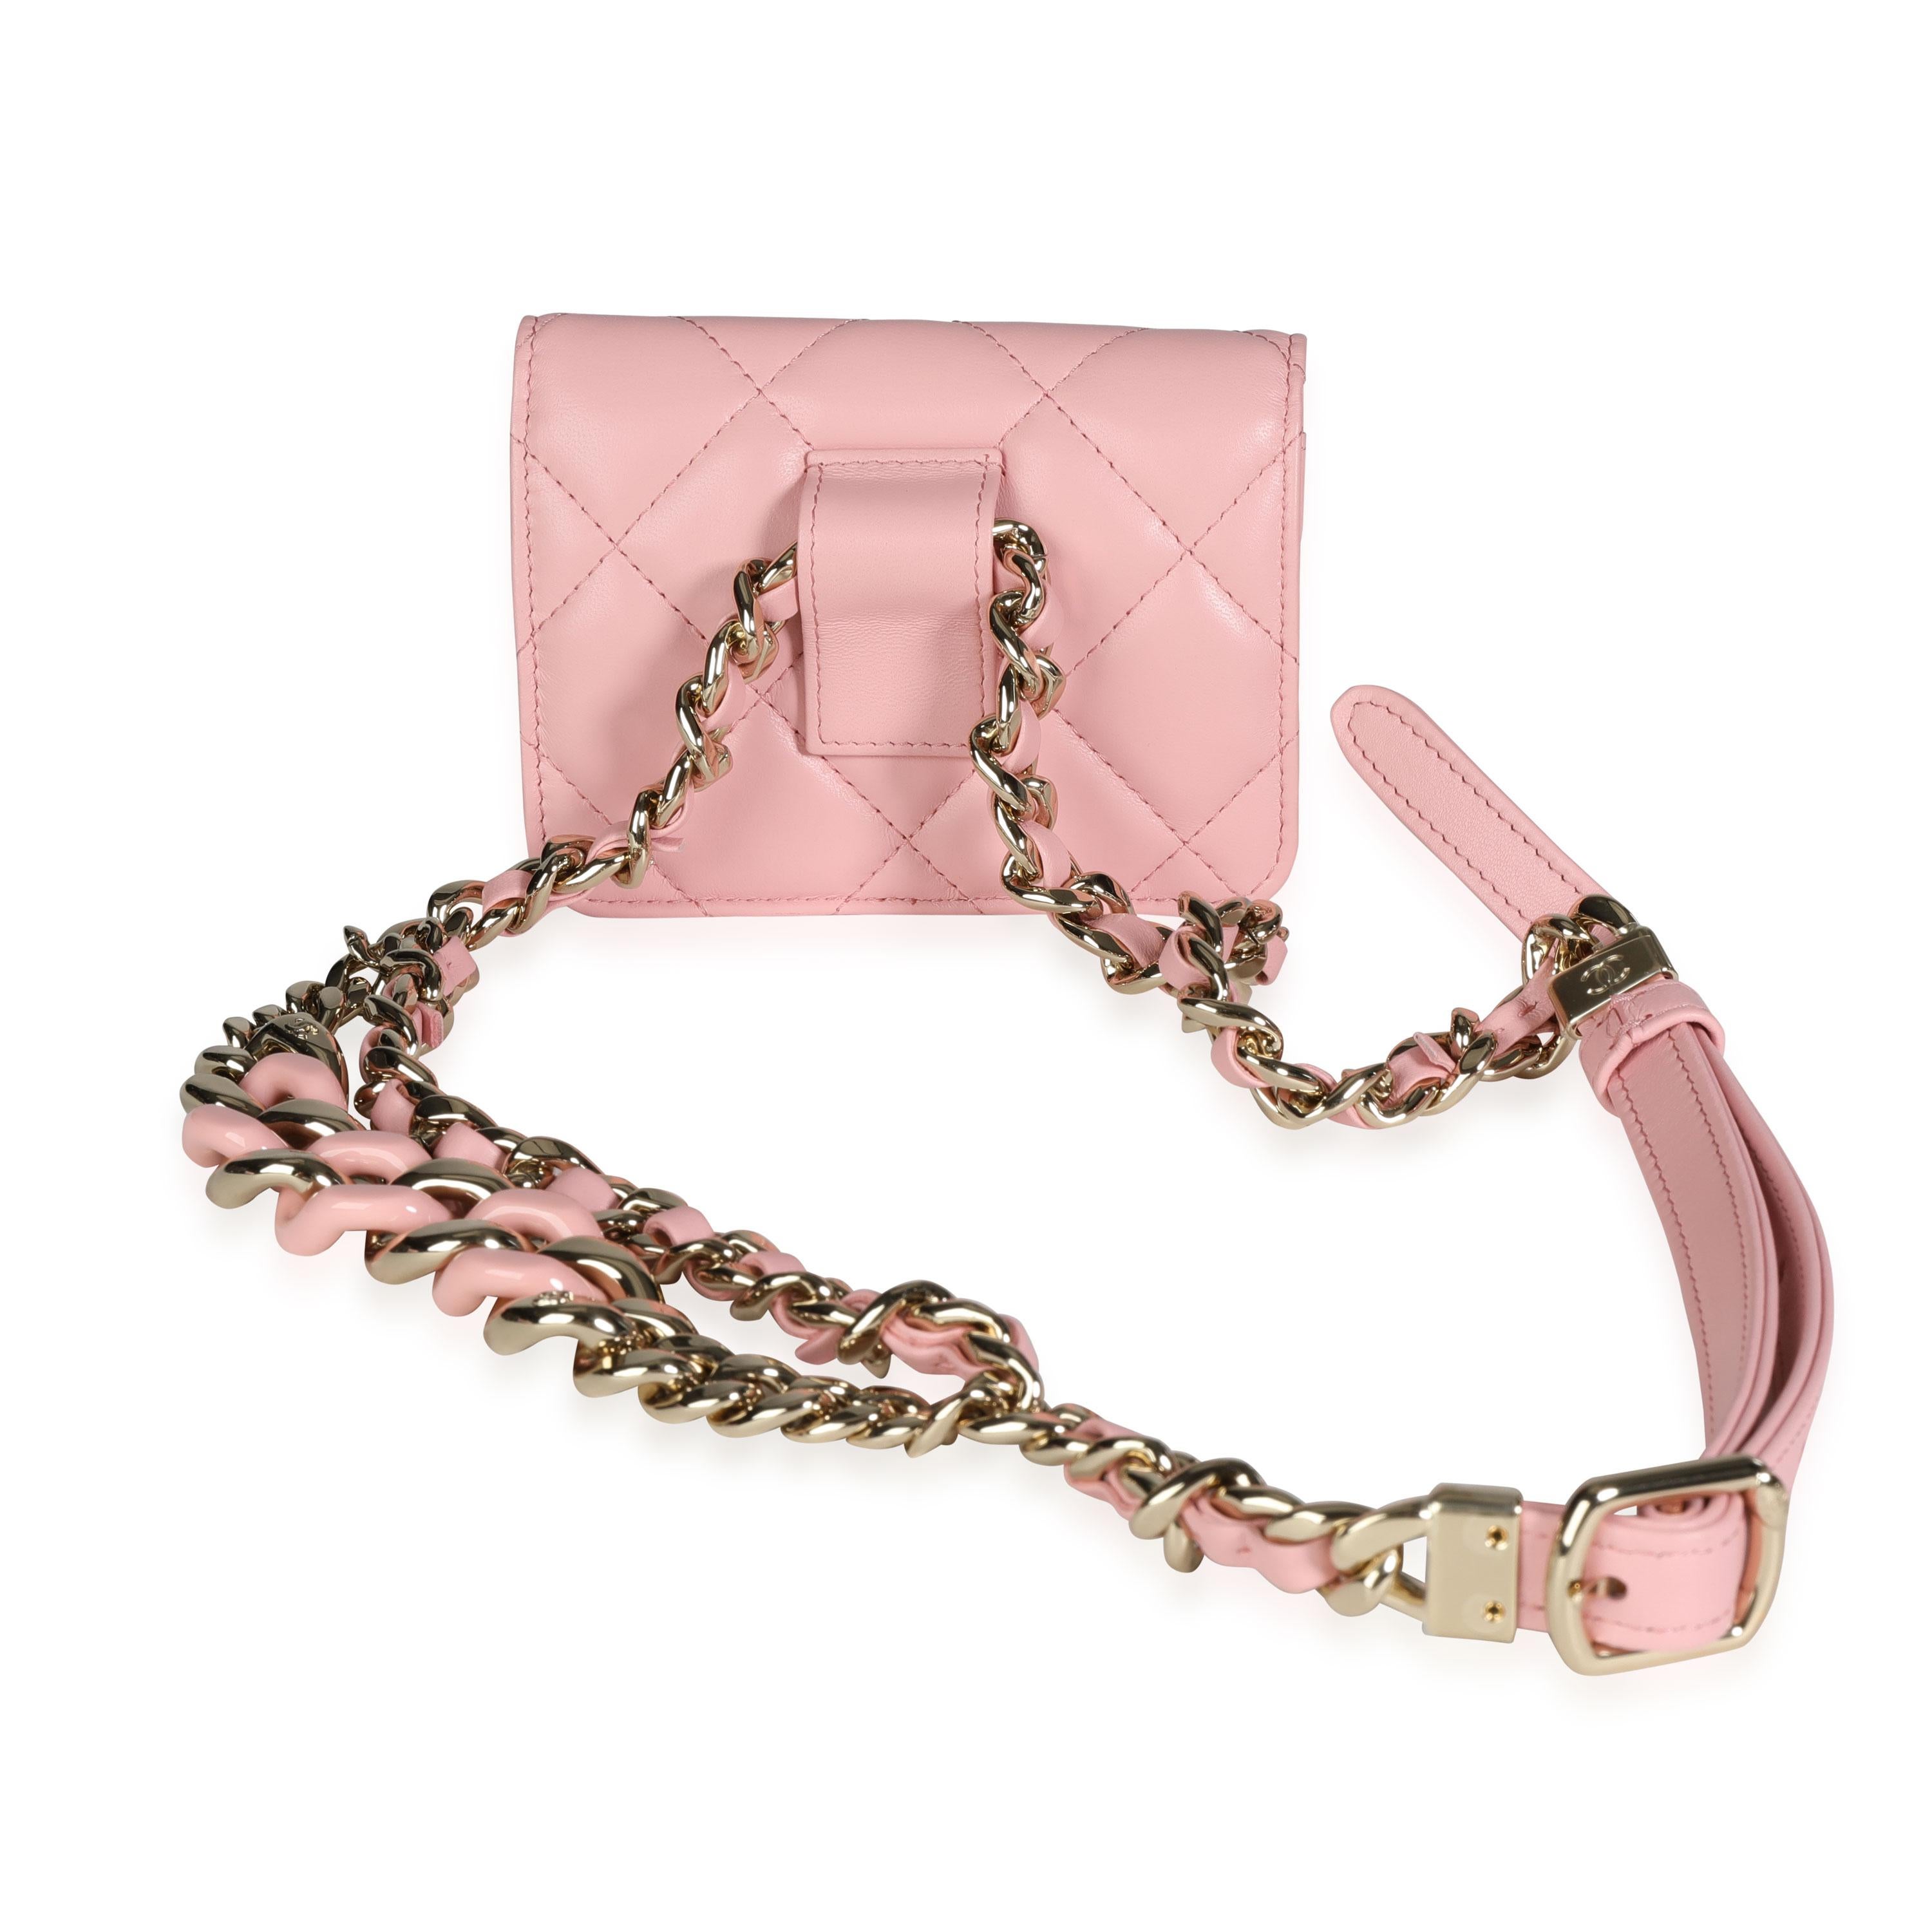 Listing Title: Chanel Pink Quilted Lambskin Elegant Chain Mini Belt Bag
SKU: 116593
Condition: Pre-owned (3000)
Handbag Condition: Mint
Condition Comments: Mint Condition. Plastic on hardware. No visible signs of wear. Final Sale. Final sale.
Brand: